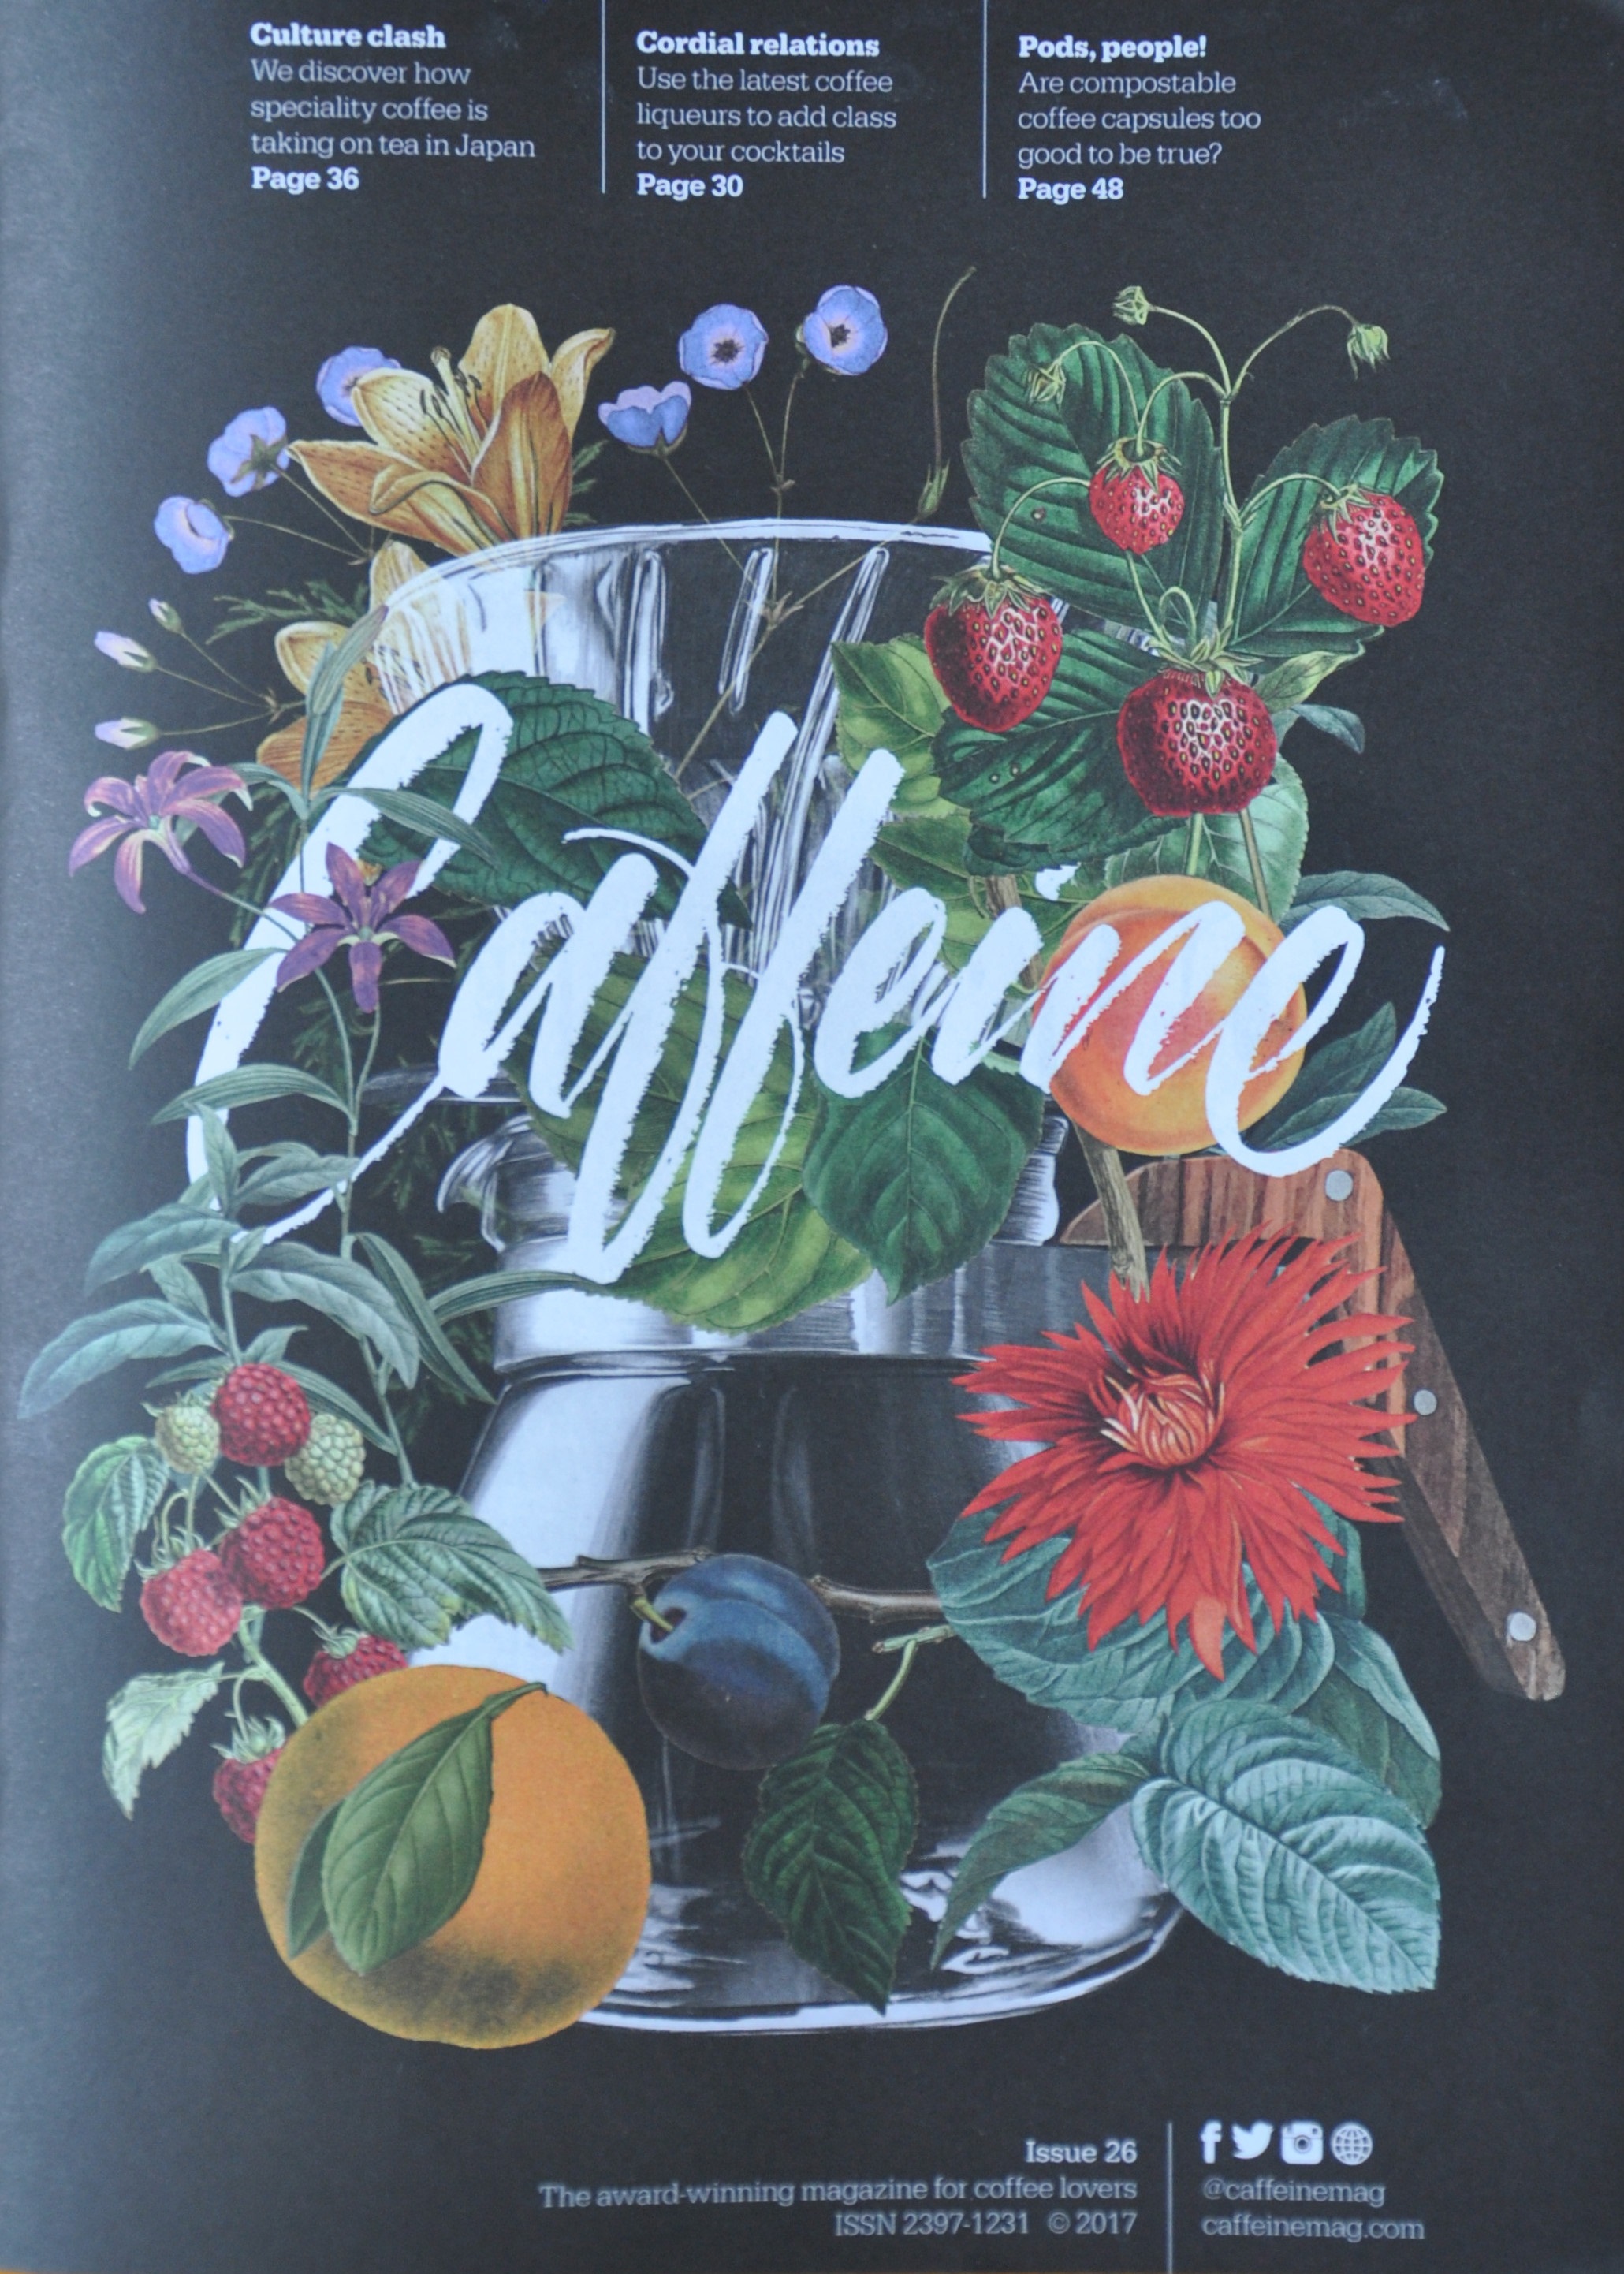 The striking new design on the front cover of Caffeine Magazine, Issue 26